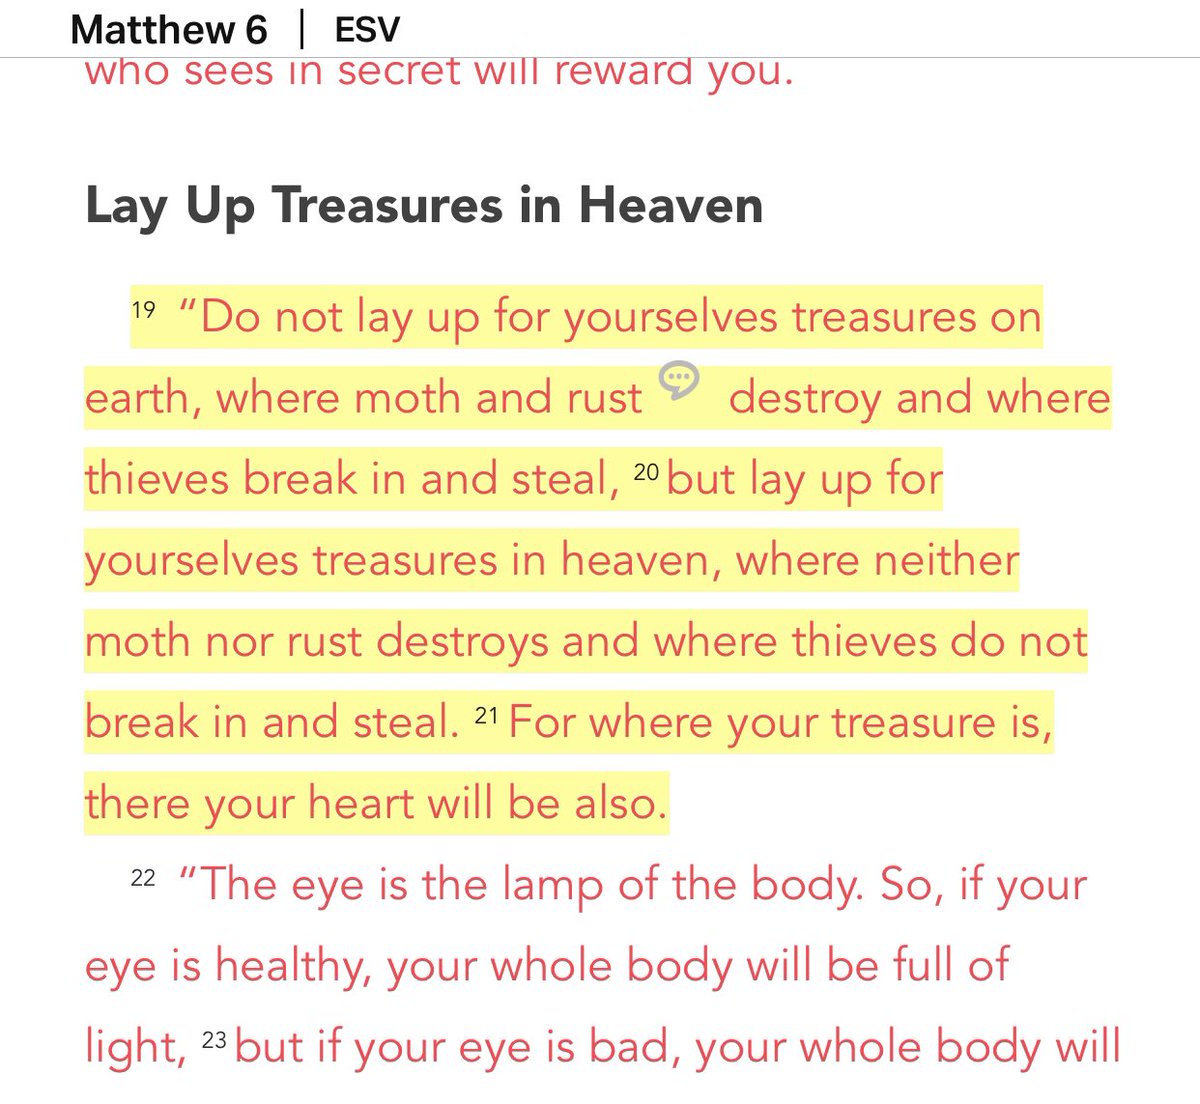 In many places in scripture, we are CAUTIONED against the deceitfulness of riches, the temptation to make your life about WHAT YOU HAVE rather than HOW YOU LIVE in regard to God’s purpose for you. In scripture, the rich are warned and warned against. Today, it’s the reverse.